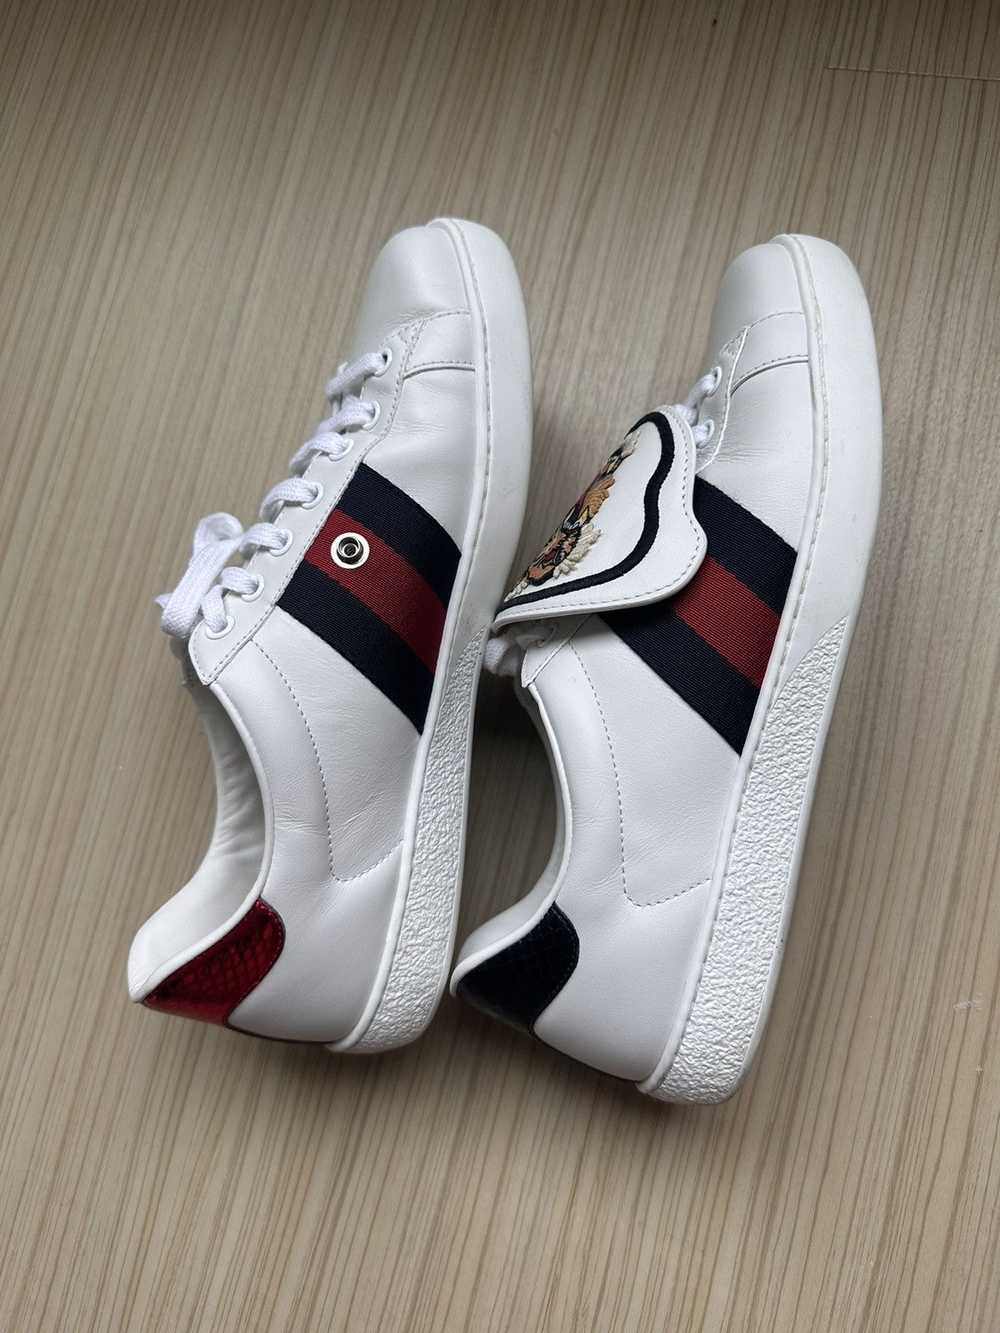 Gucci Gucci Ace Sneakers with Removable Patches - image 6